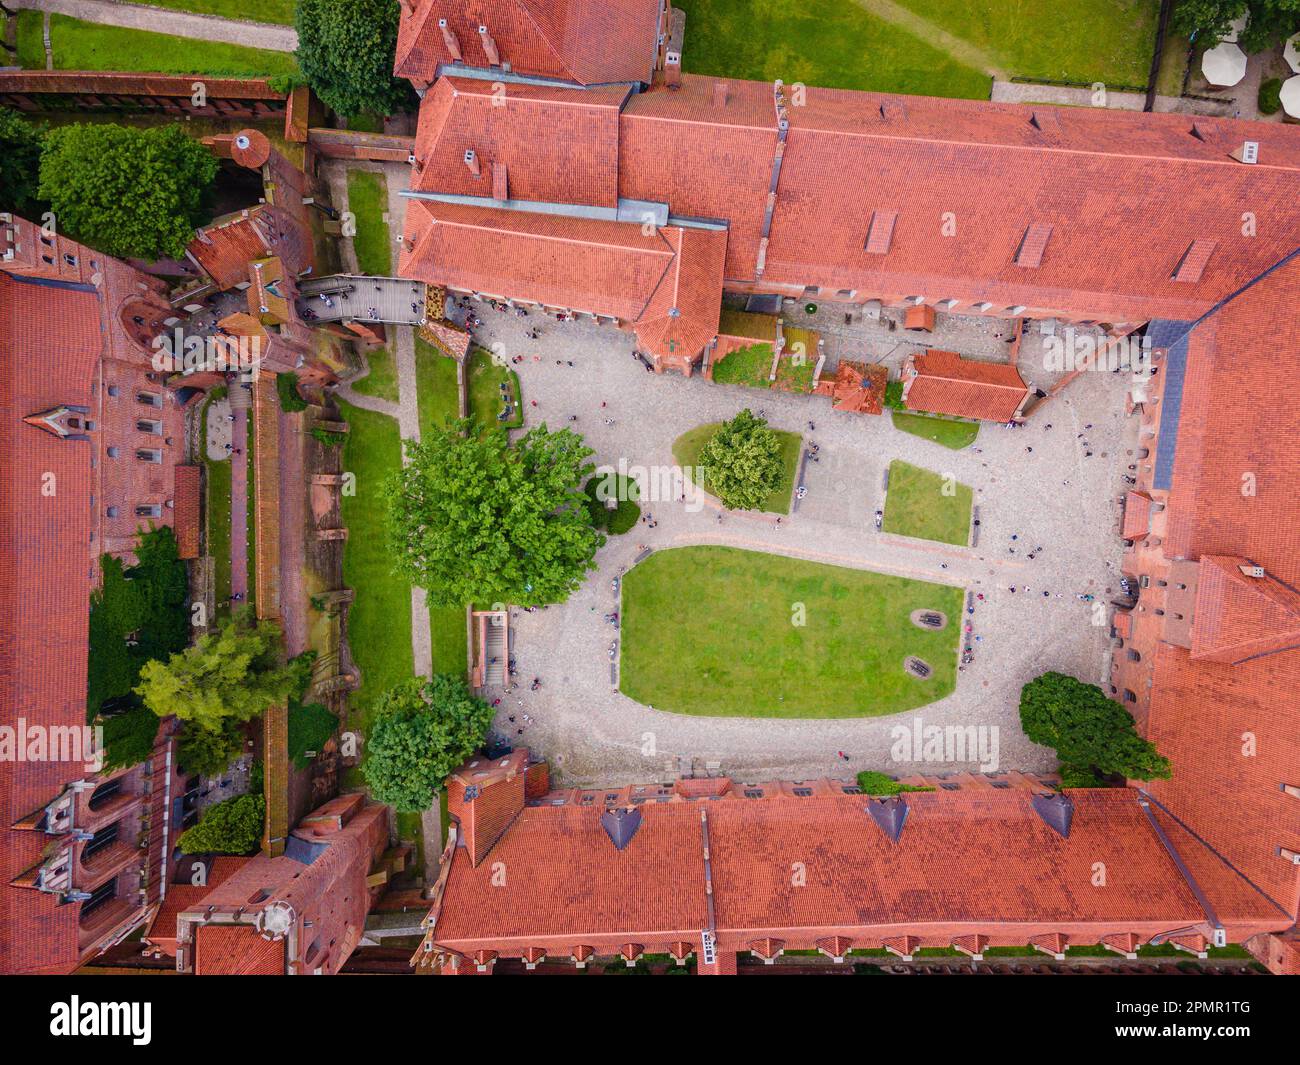 Aerial view of Malbork Teutonic order castle in Poland. It is the largest castle in the world measured by land area and a UNESCO World Heritage Site Stock Photo